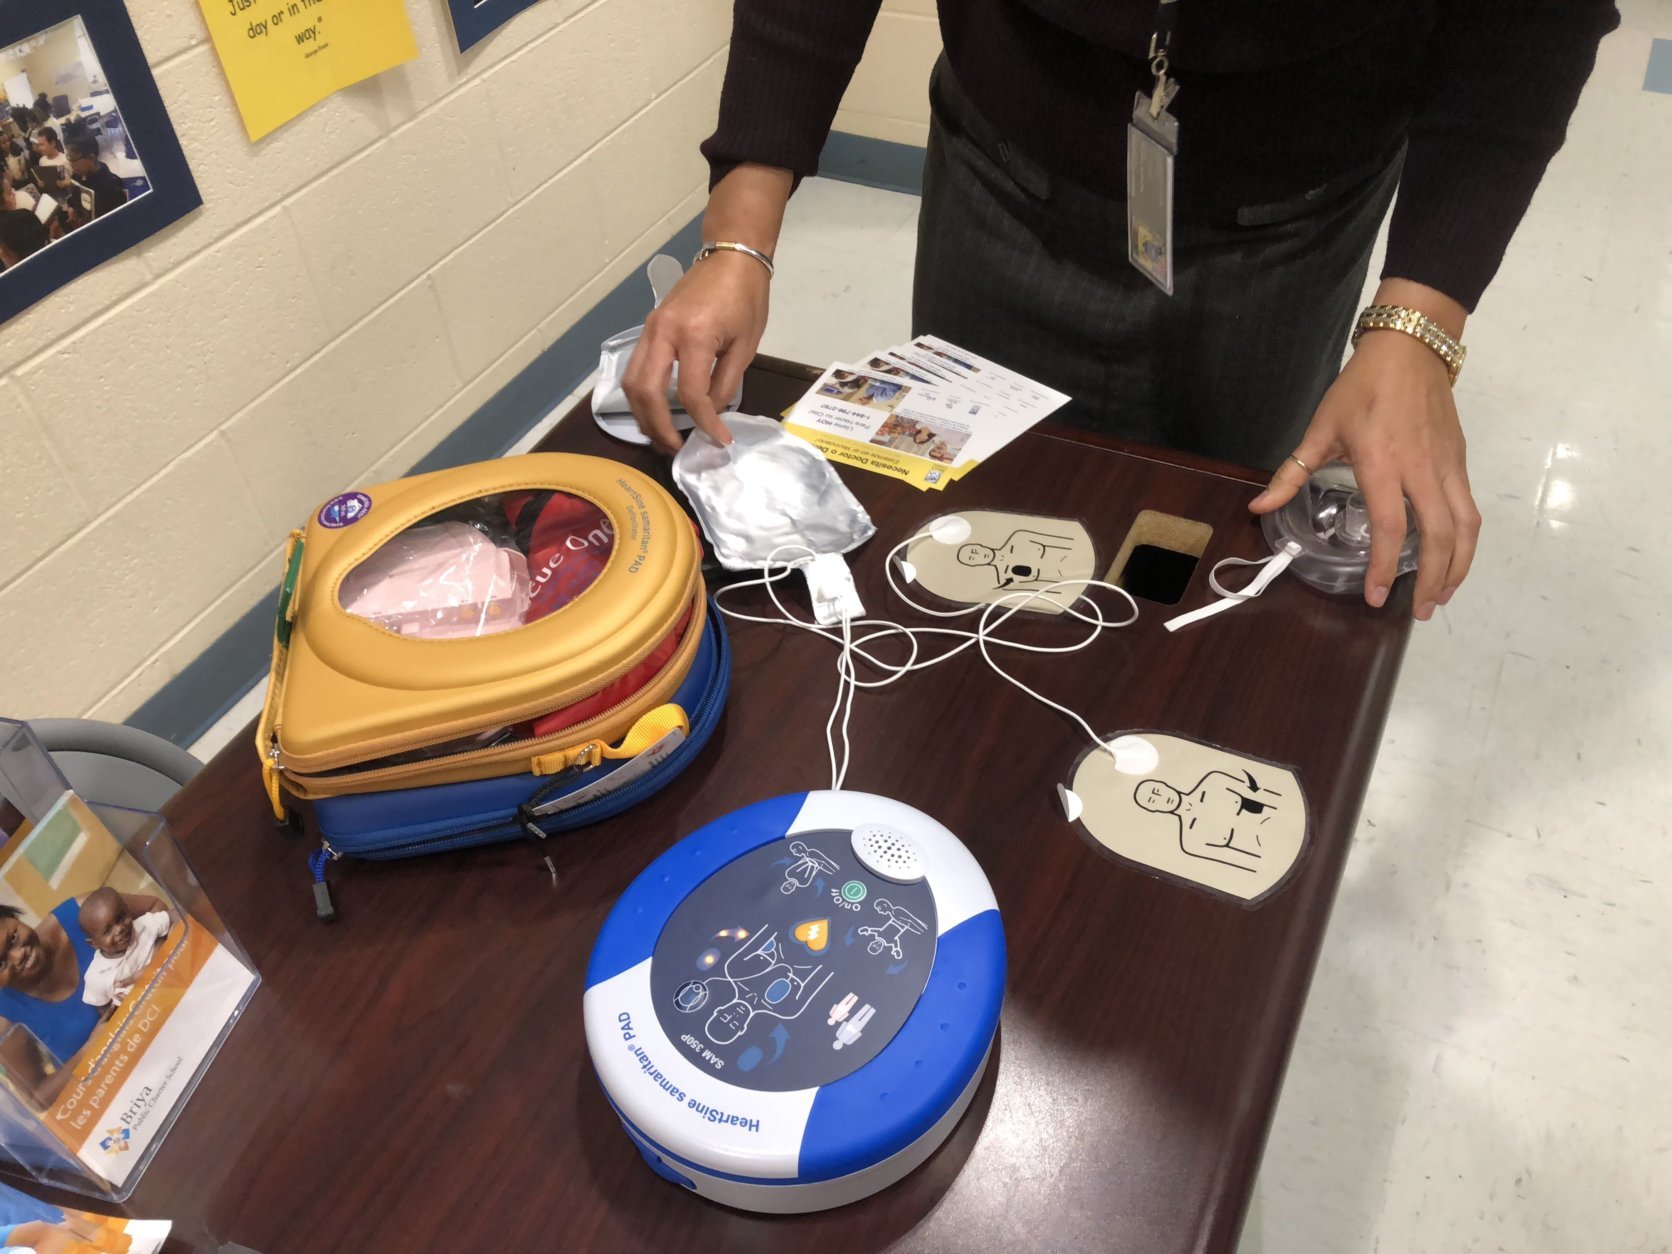 Allie Bobak said she ran to the lobby where the school had a prominently placed automated external defibrillator, and ran back to the polling site with it to help the man who collapsed. (WTOP/Mike Murillo)